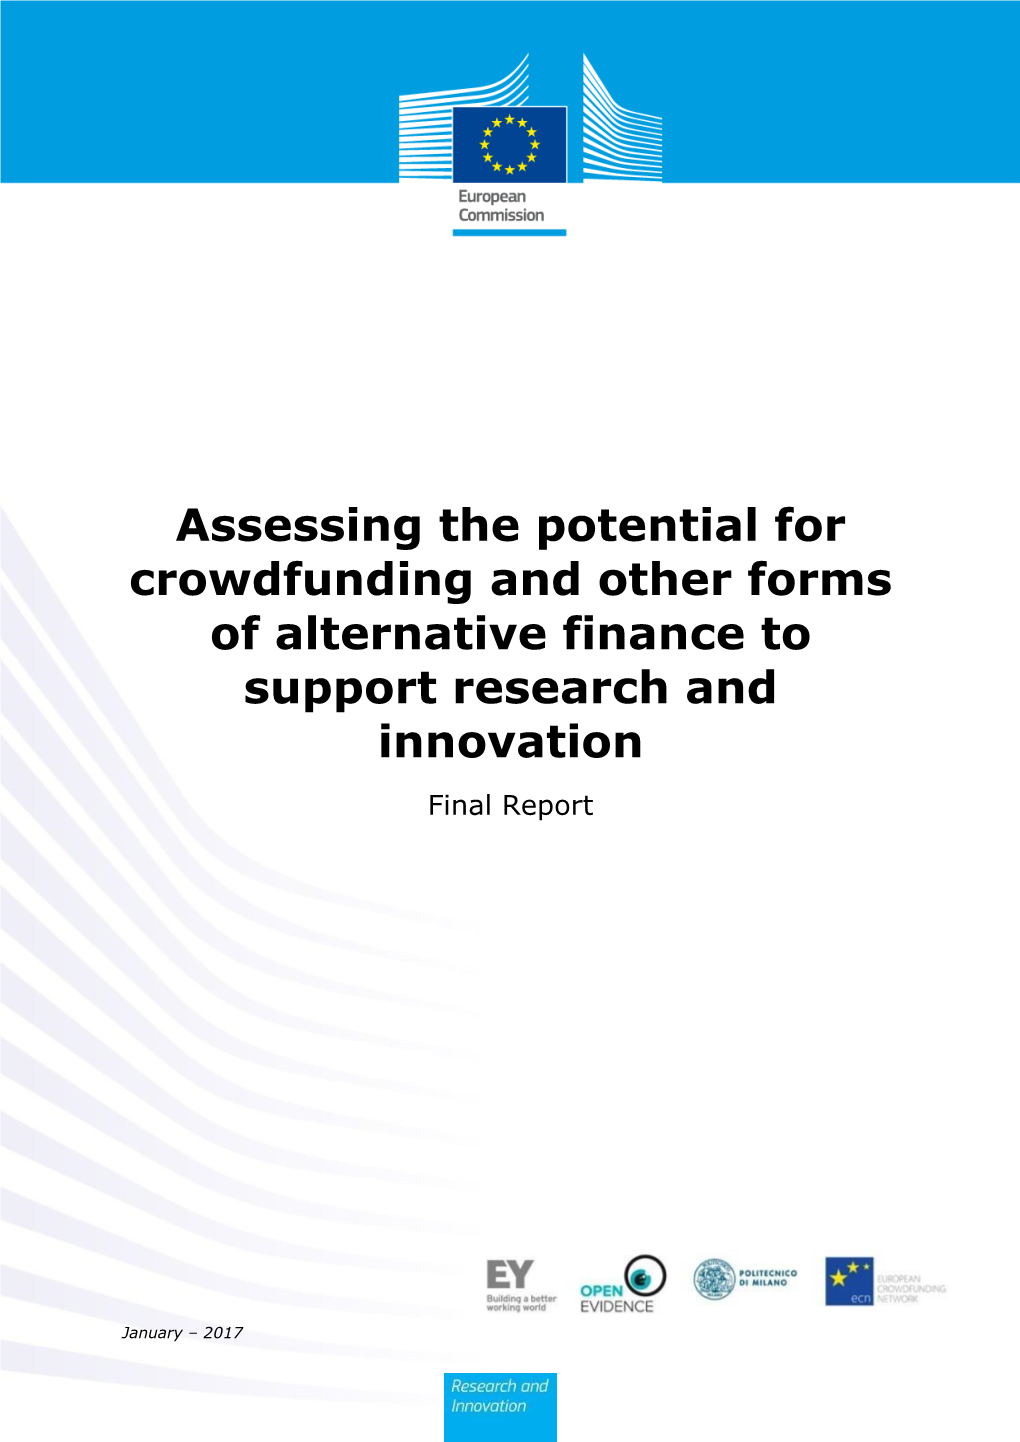 Assessing the Potential for Crowdfunding and Other Forms of Alternative Finance to Support Research and Innovation Final Report